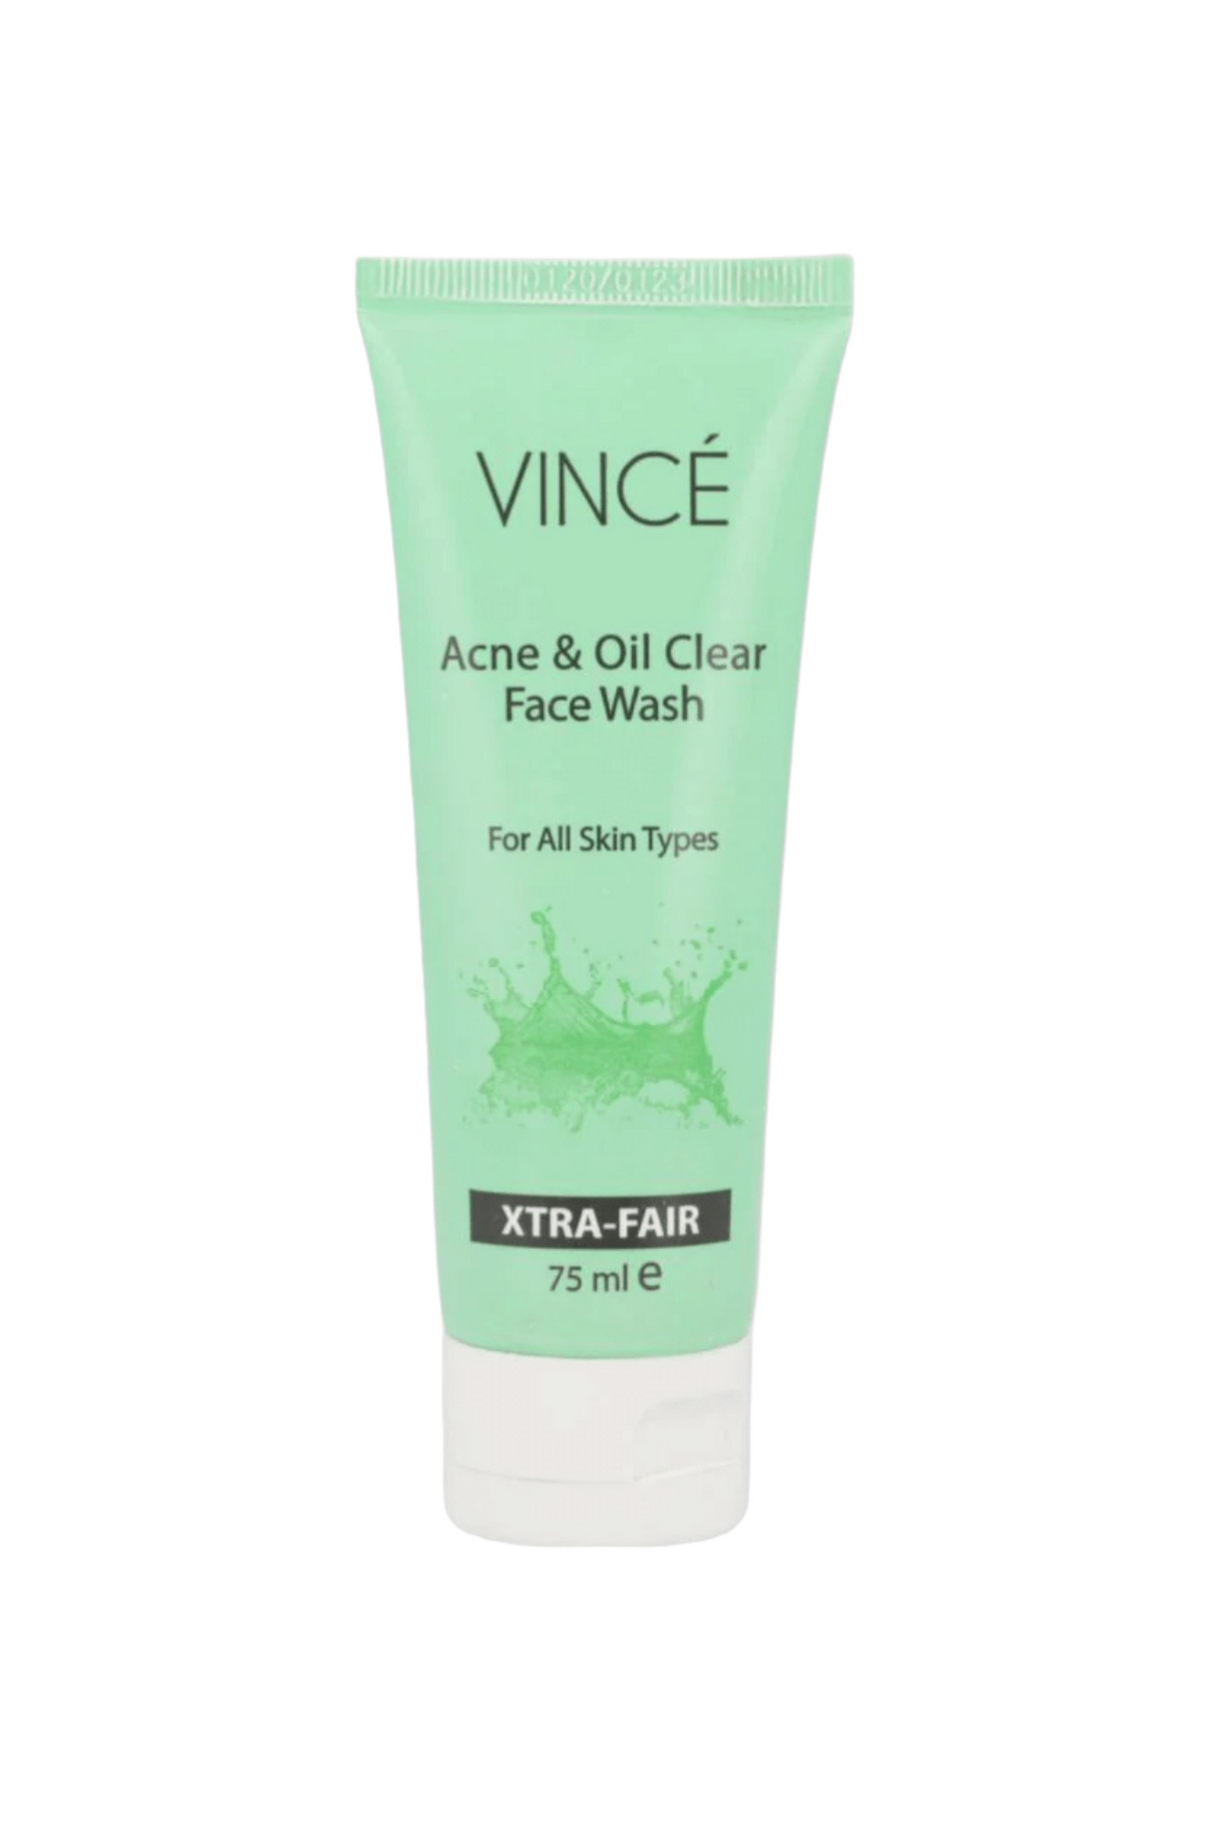 vince face wash acne&oil clear 75ml